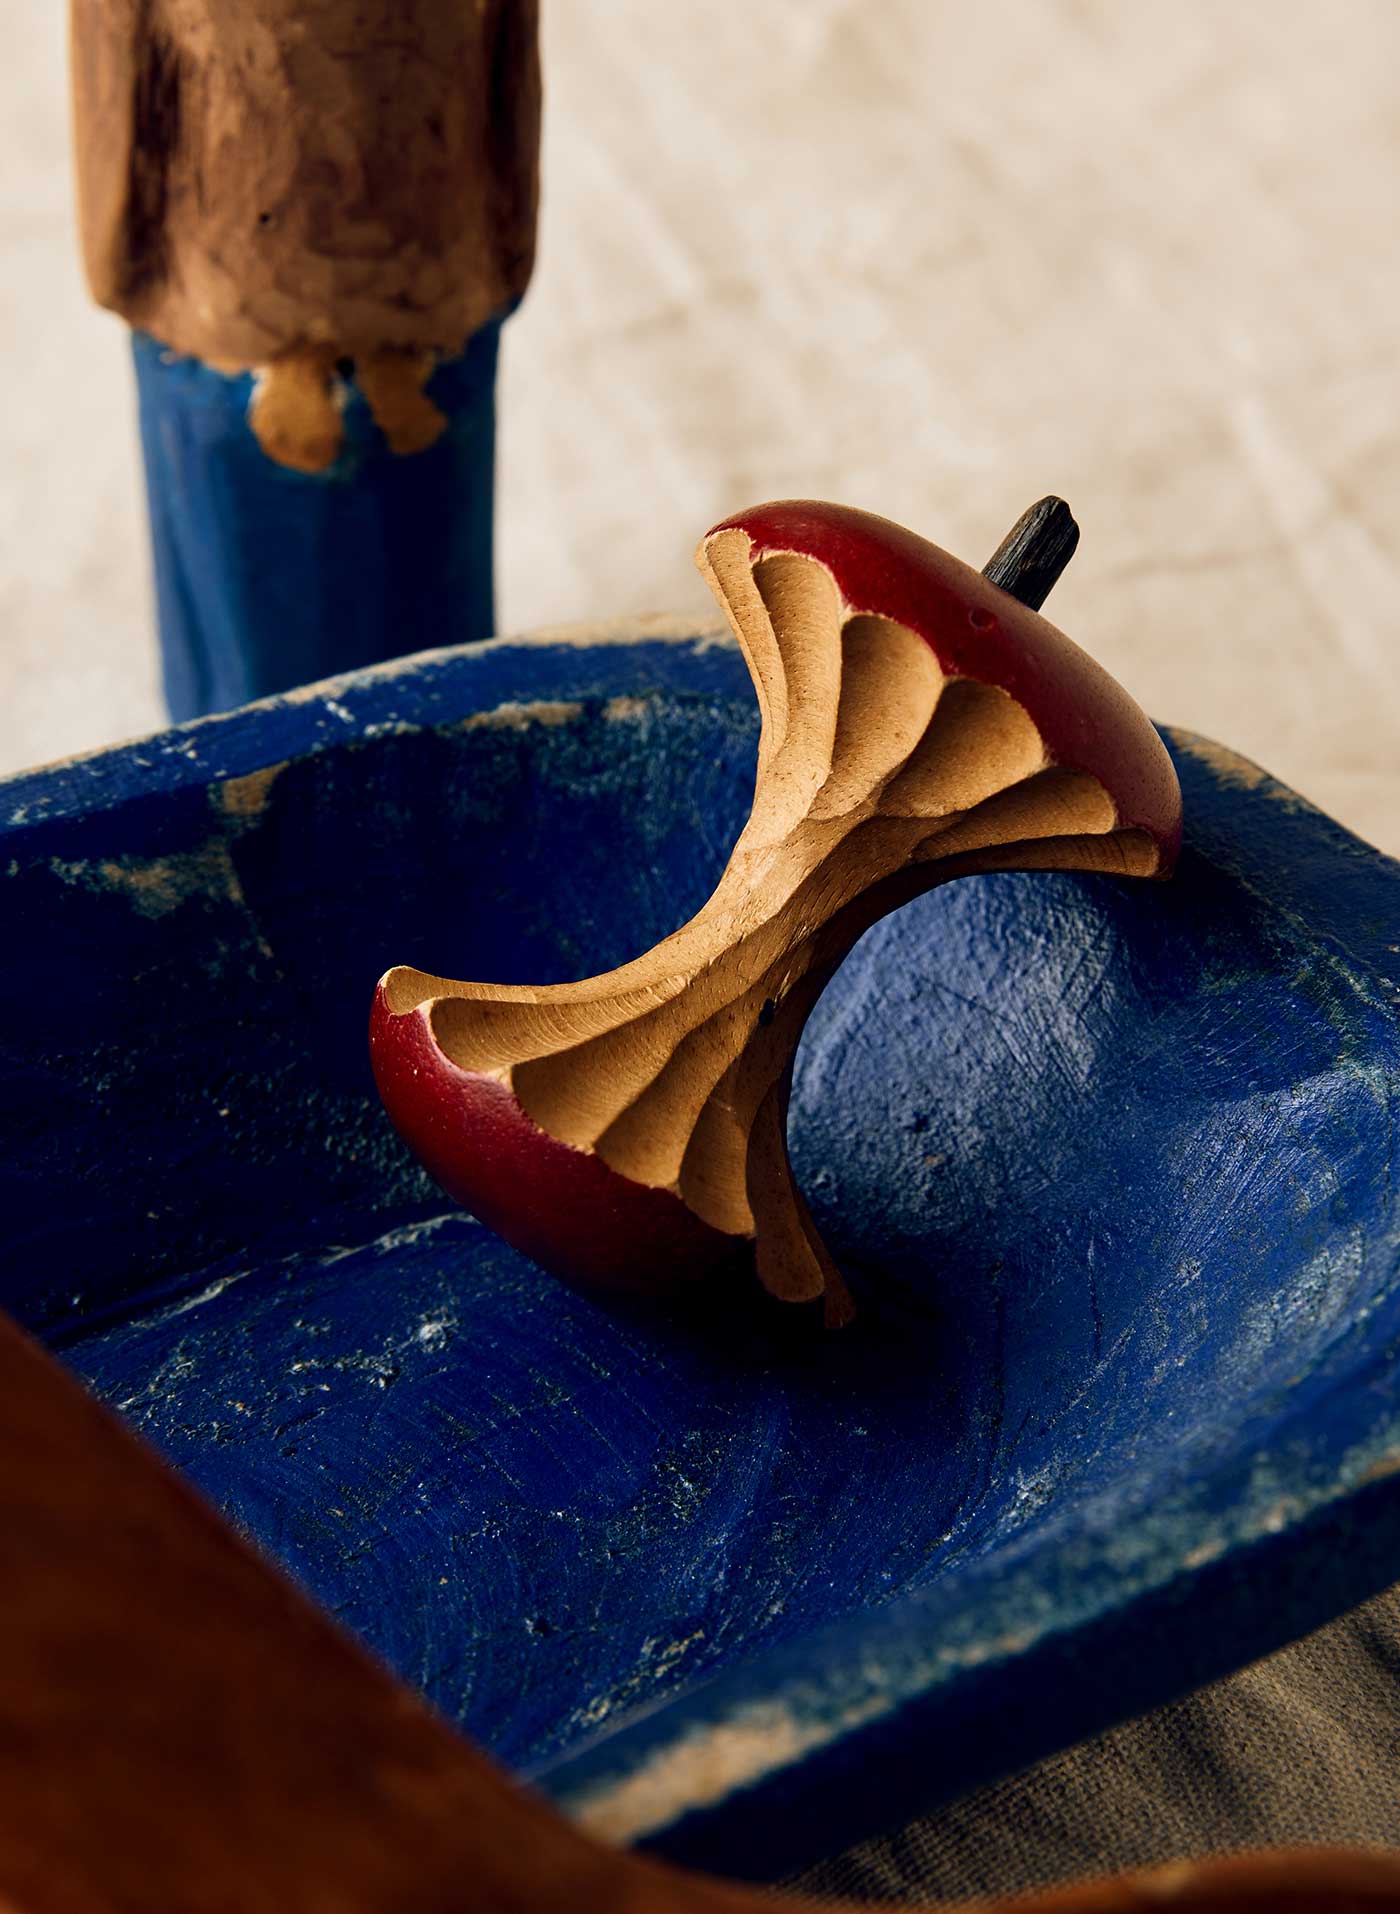 Wood, Natural material, Paint, Electric blue, Wood stain, Human leg, Carmine, Plywood, Varnish, Fashion accessory